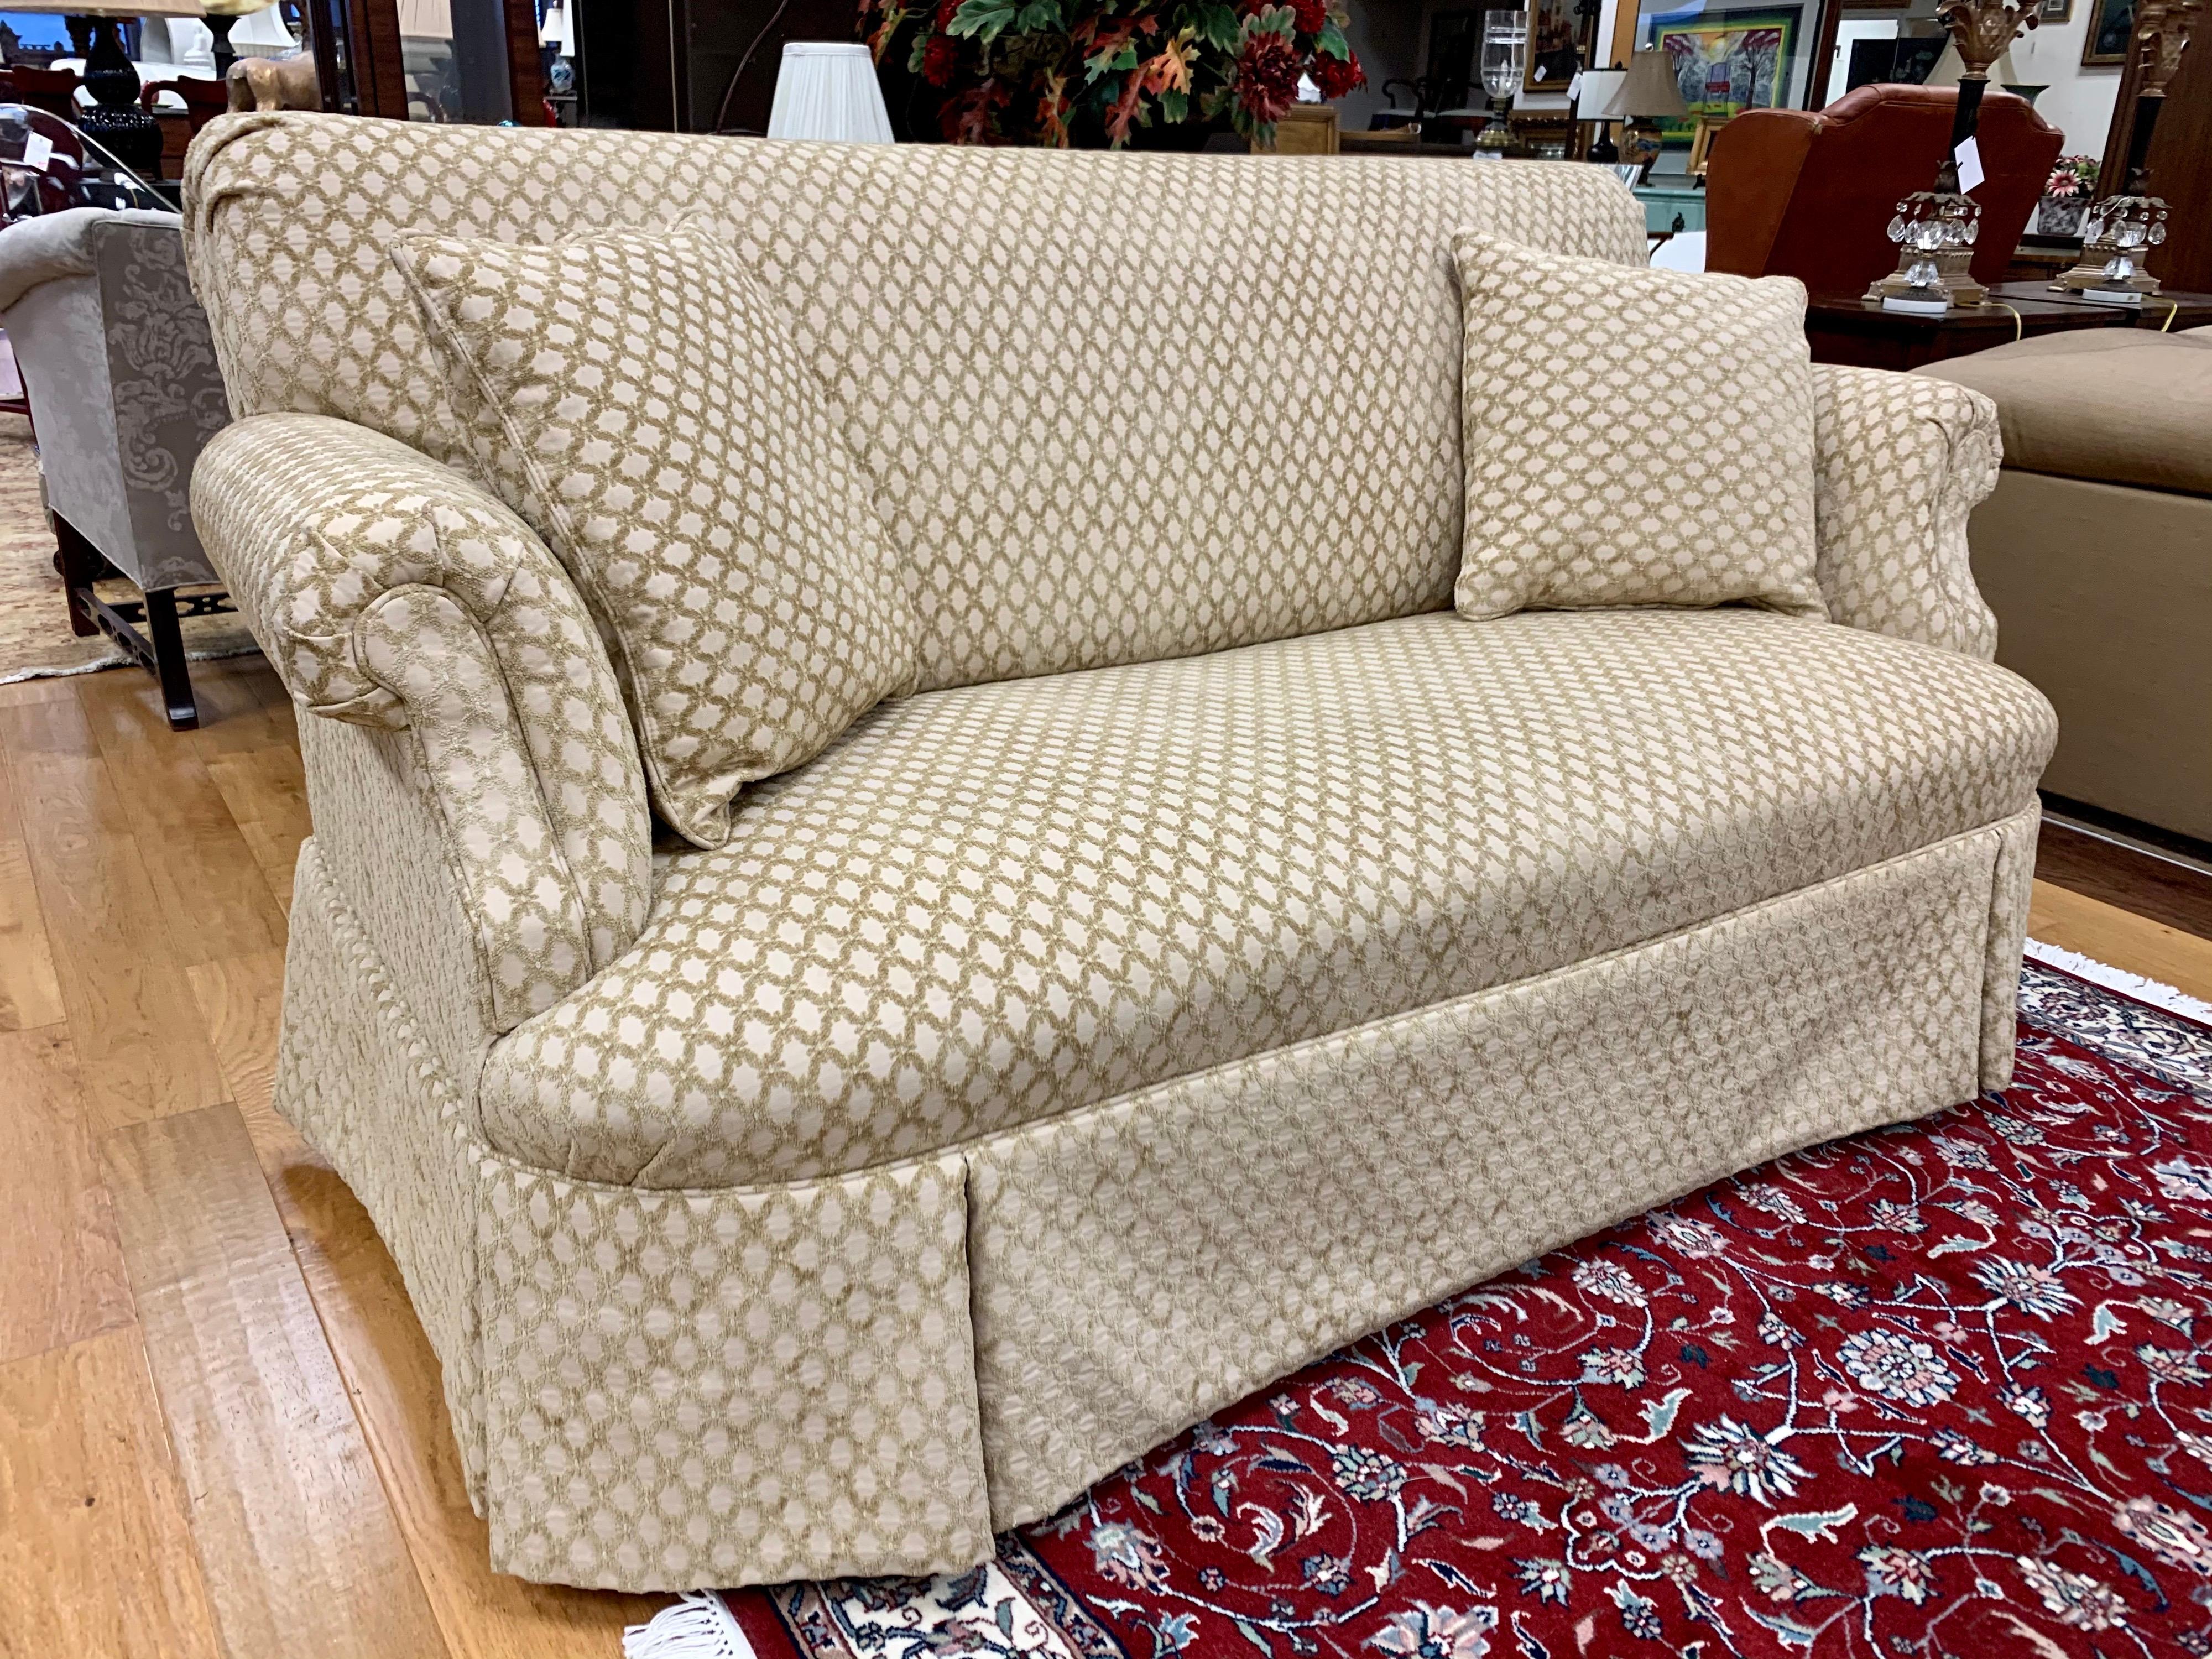 Stunning matching pair of custom loveseats that measure six feet wide and have luxurious Kravet fabric
featuring a regal raised trellis pattern. All dimensions are below. Now, more than ever, home is where the heart is.